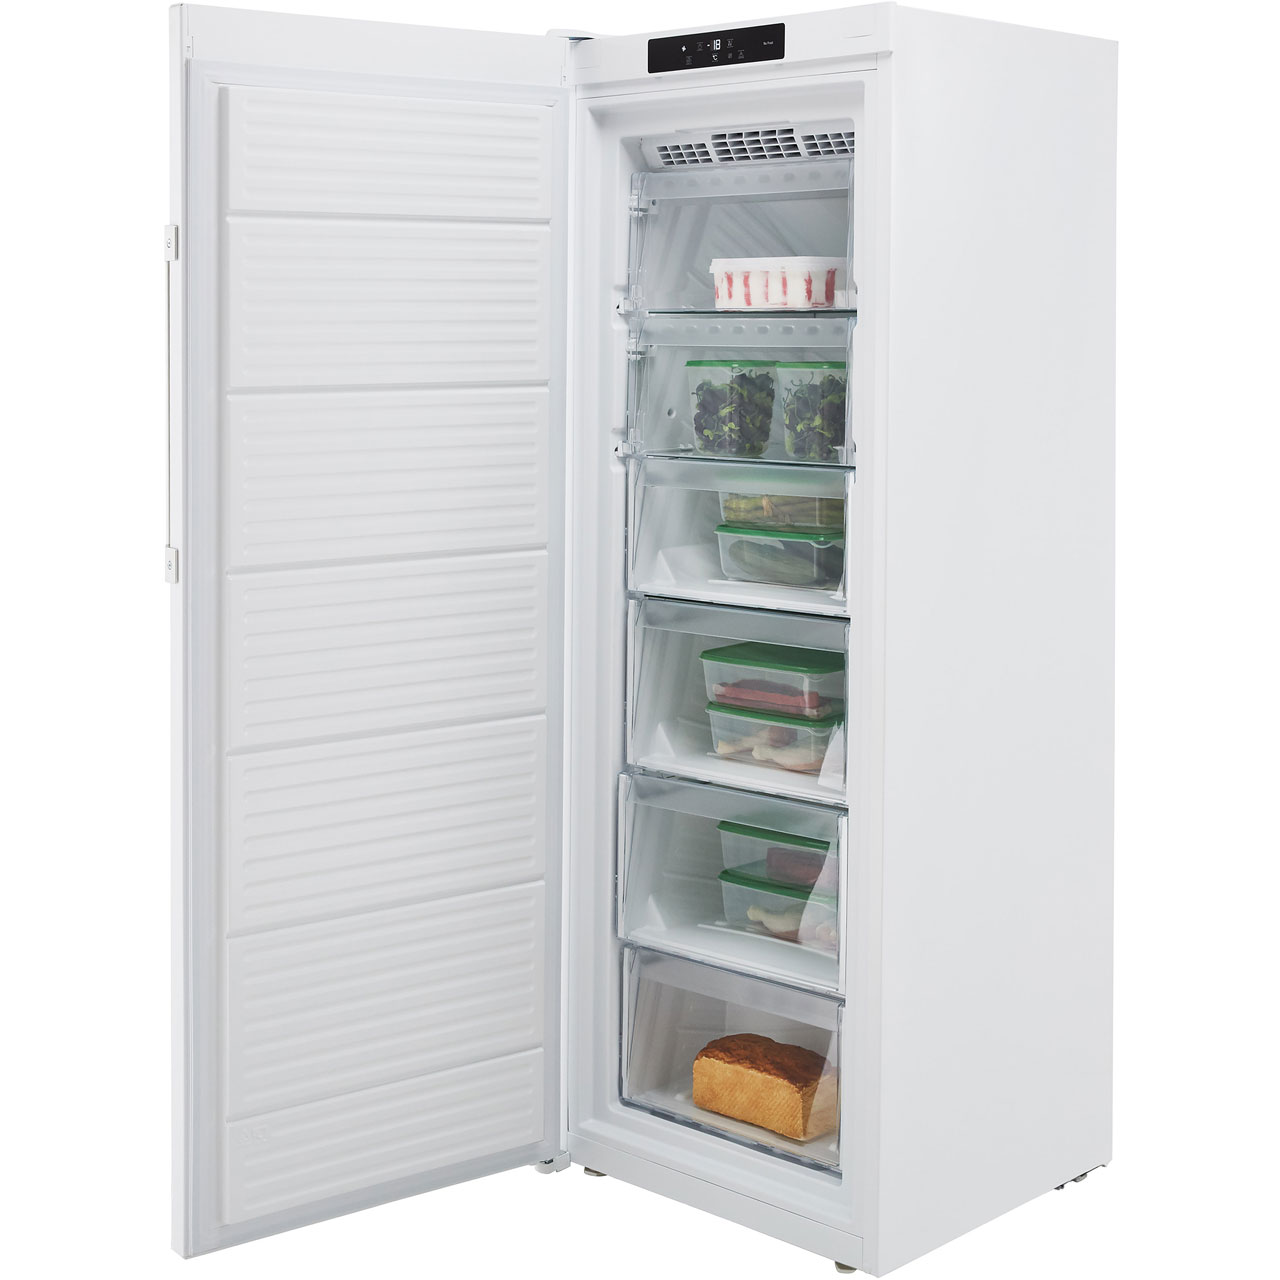 Hotpoint UH6F1CW.1 Frost Free Upright Freezer Review